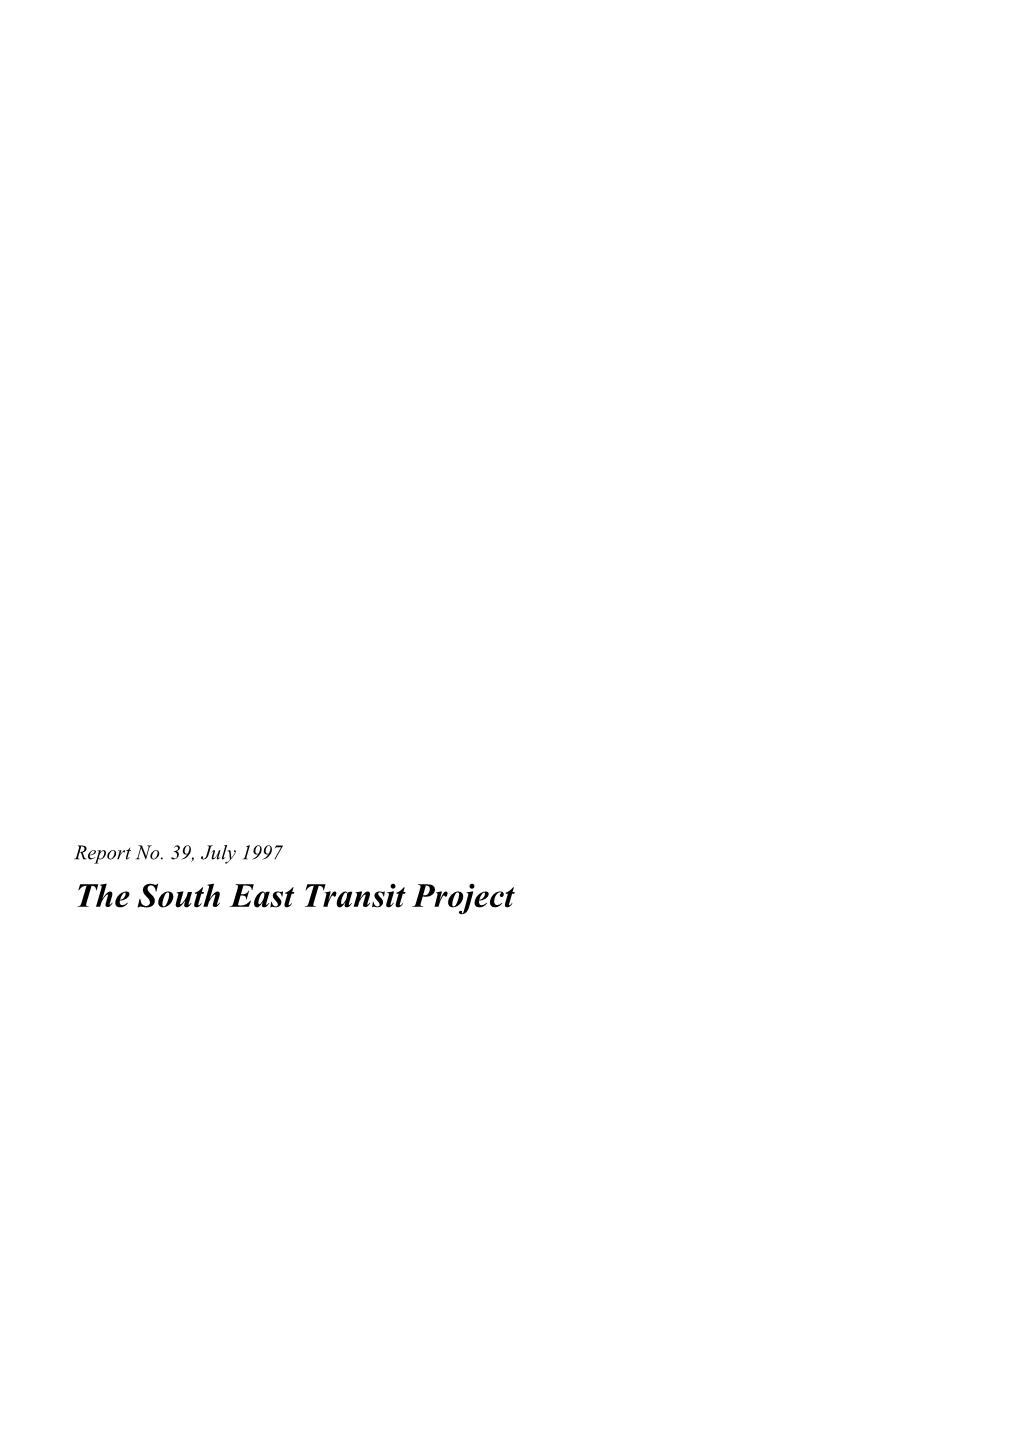 The South East Transit Project LEGISLATIVE ASSEMBLY of QUEENSLAND